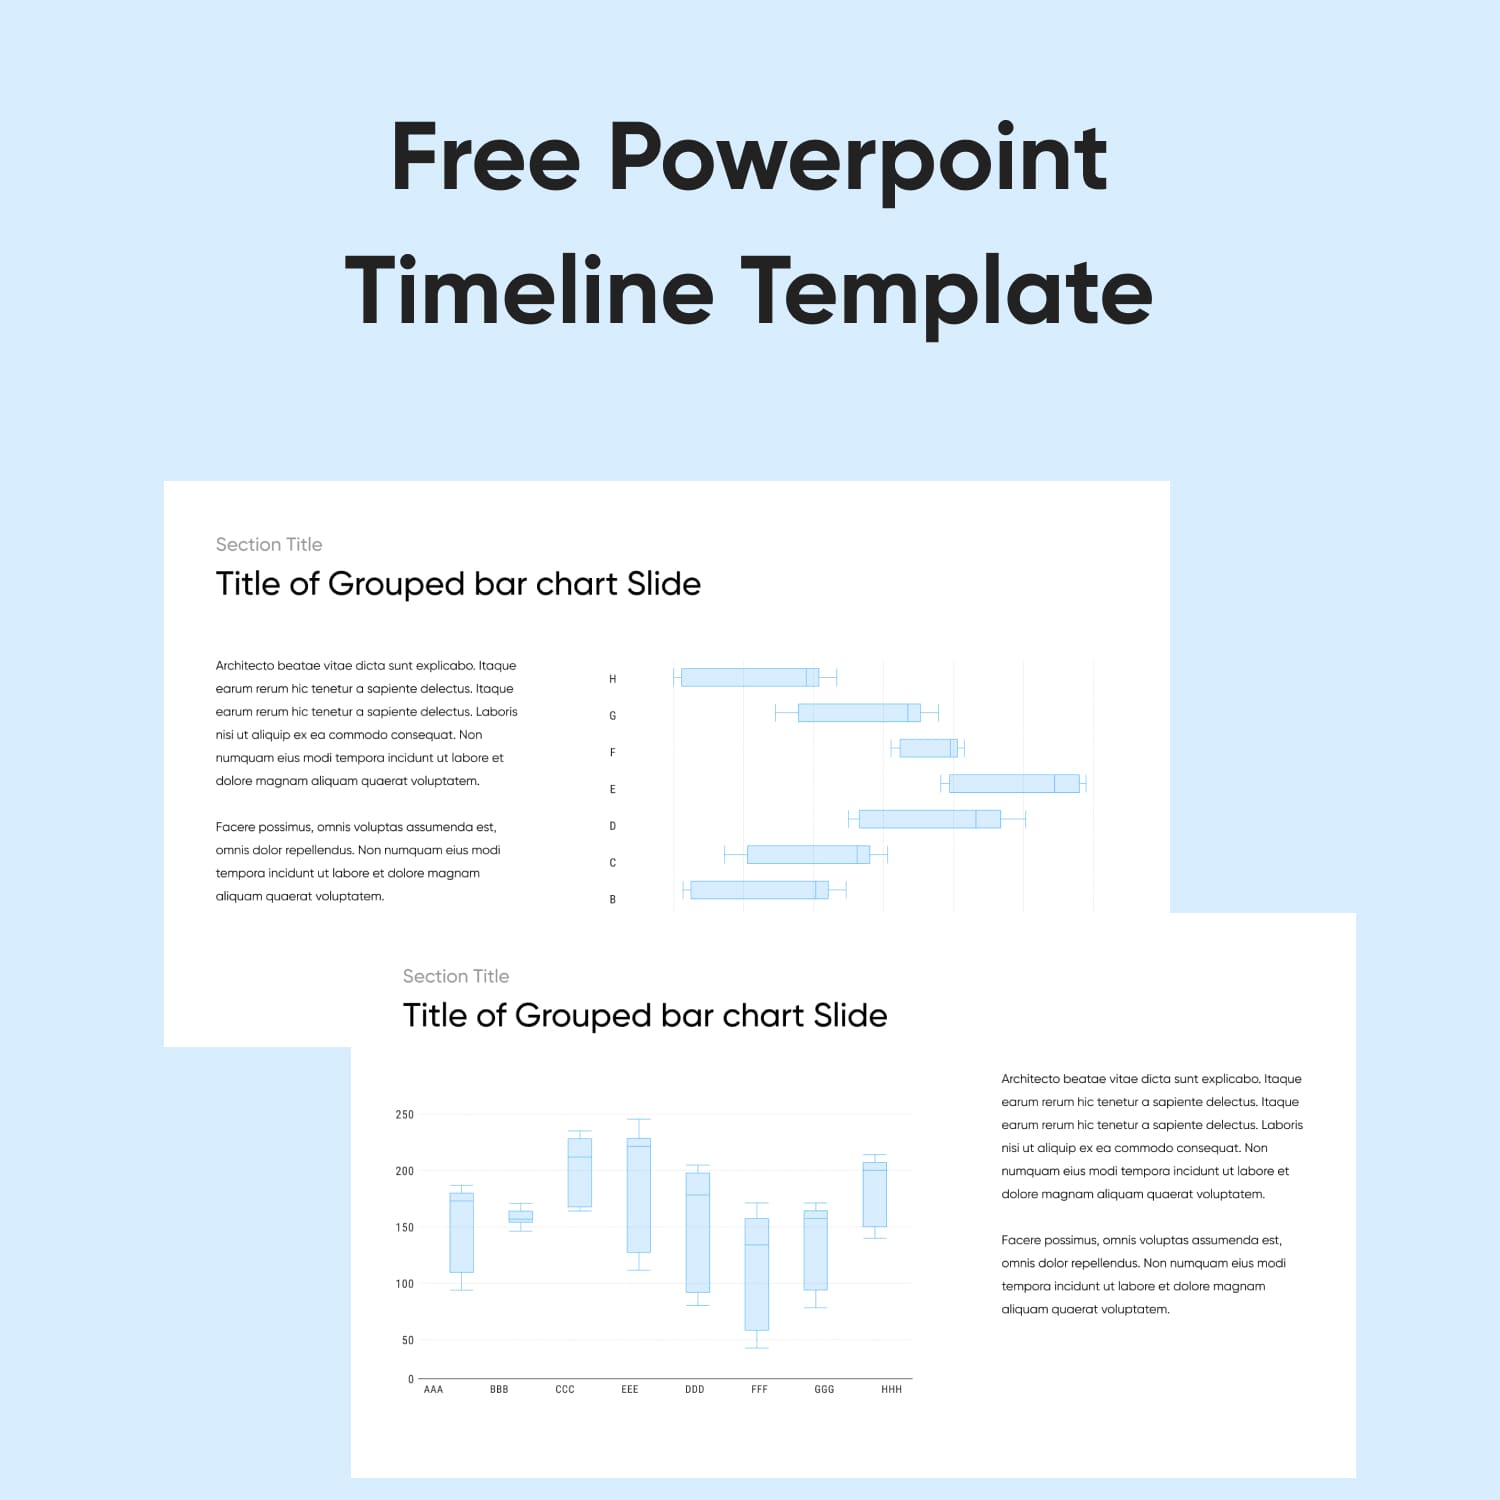 Images with powerpoint timeline template.